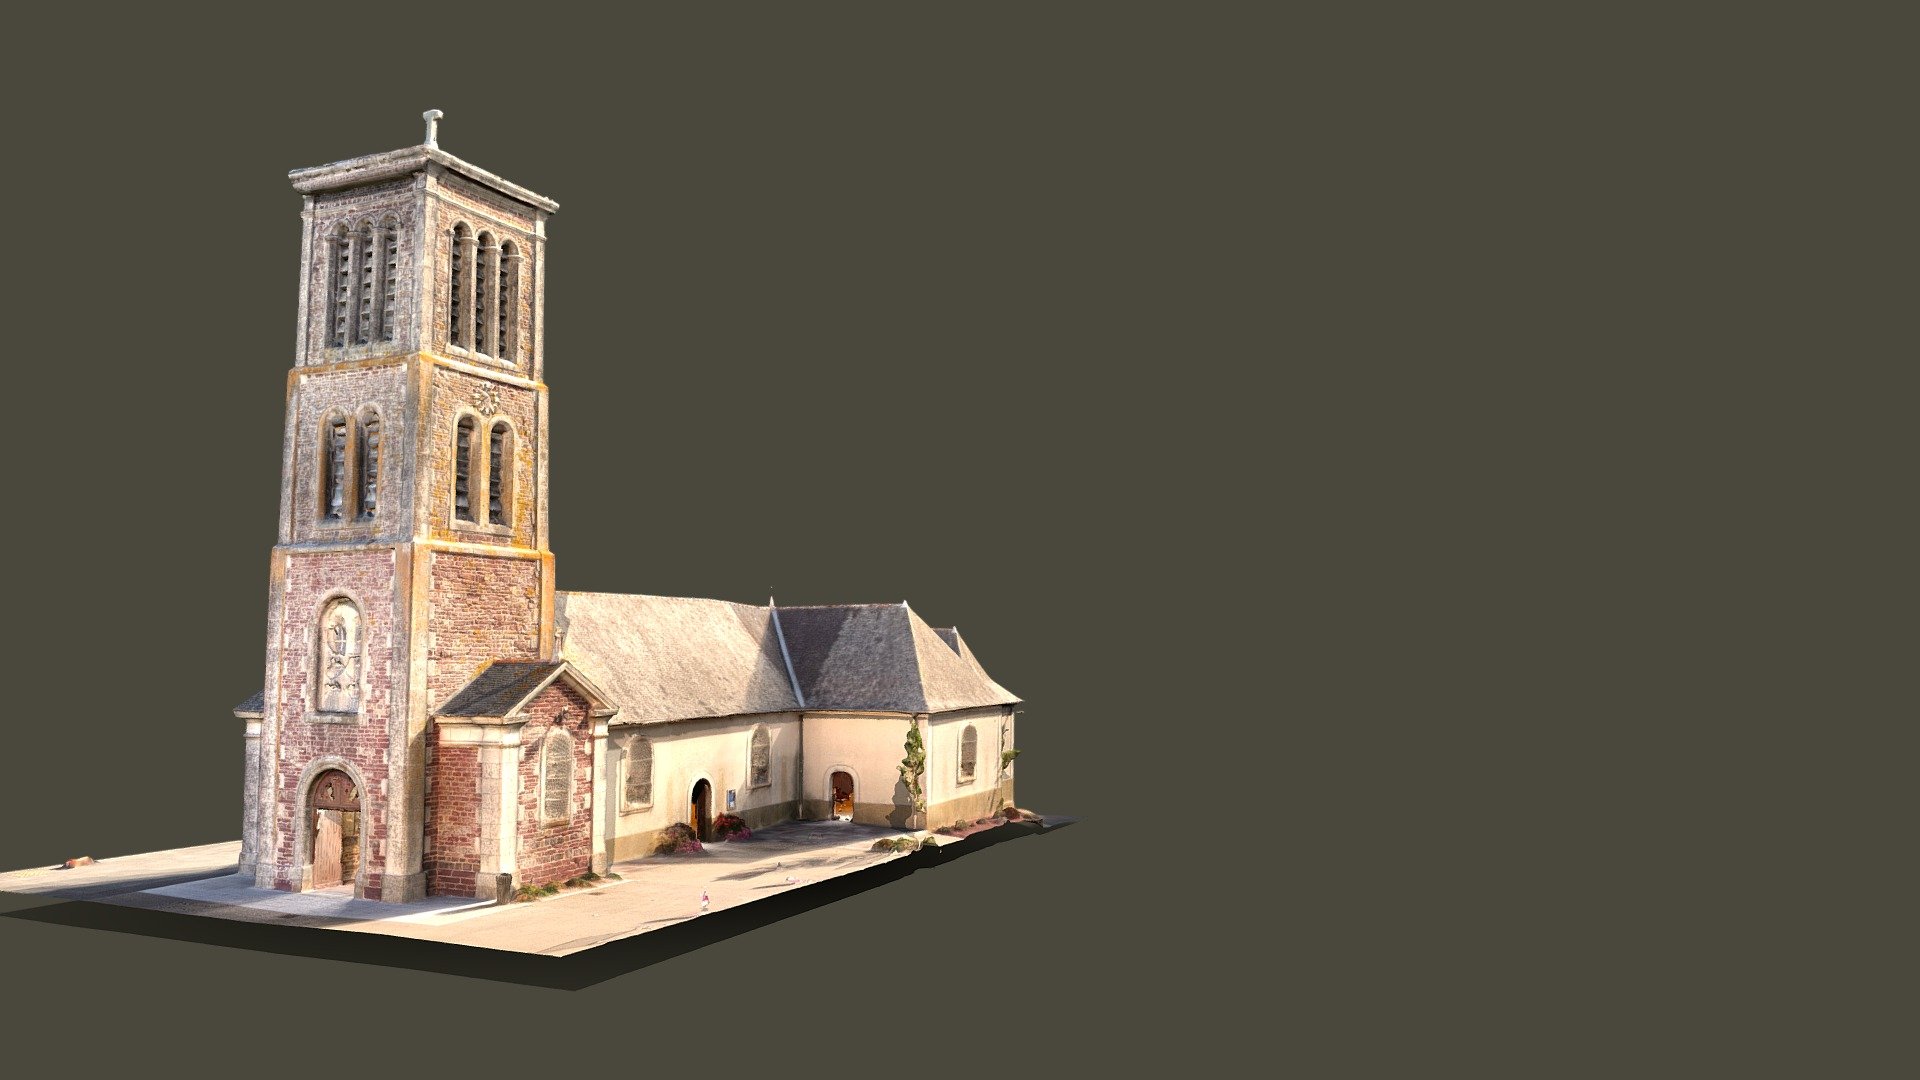 EDIT : I have changed the animation timeline. The model can loaded before the animation start

Inside and outside photogrammetry model of Saint-Thurial church.
Cut in half by a giant lightsaber 3d model